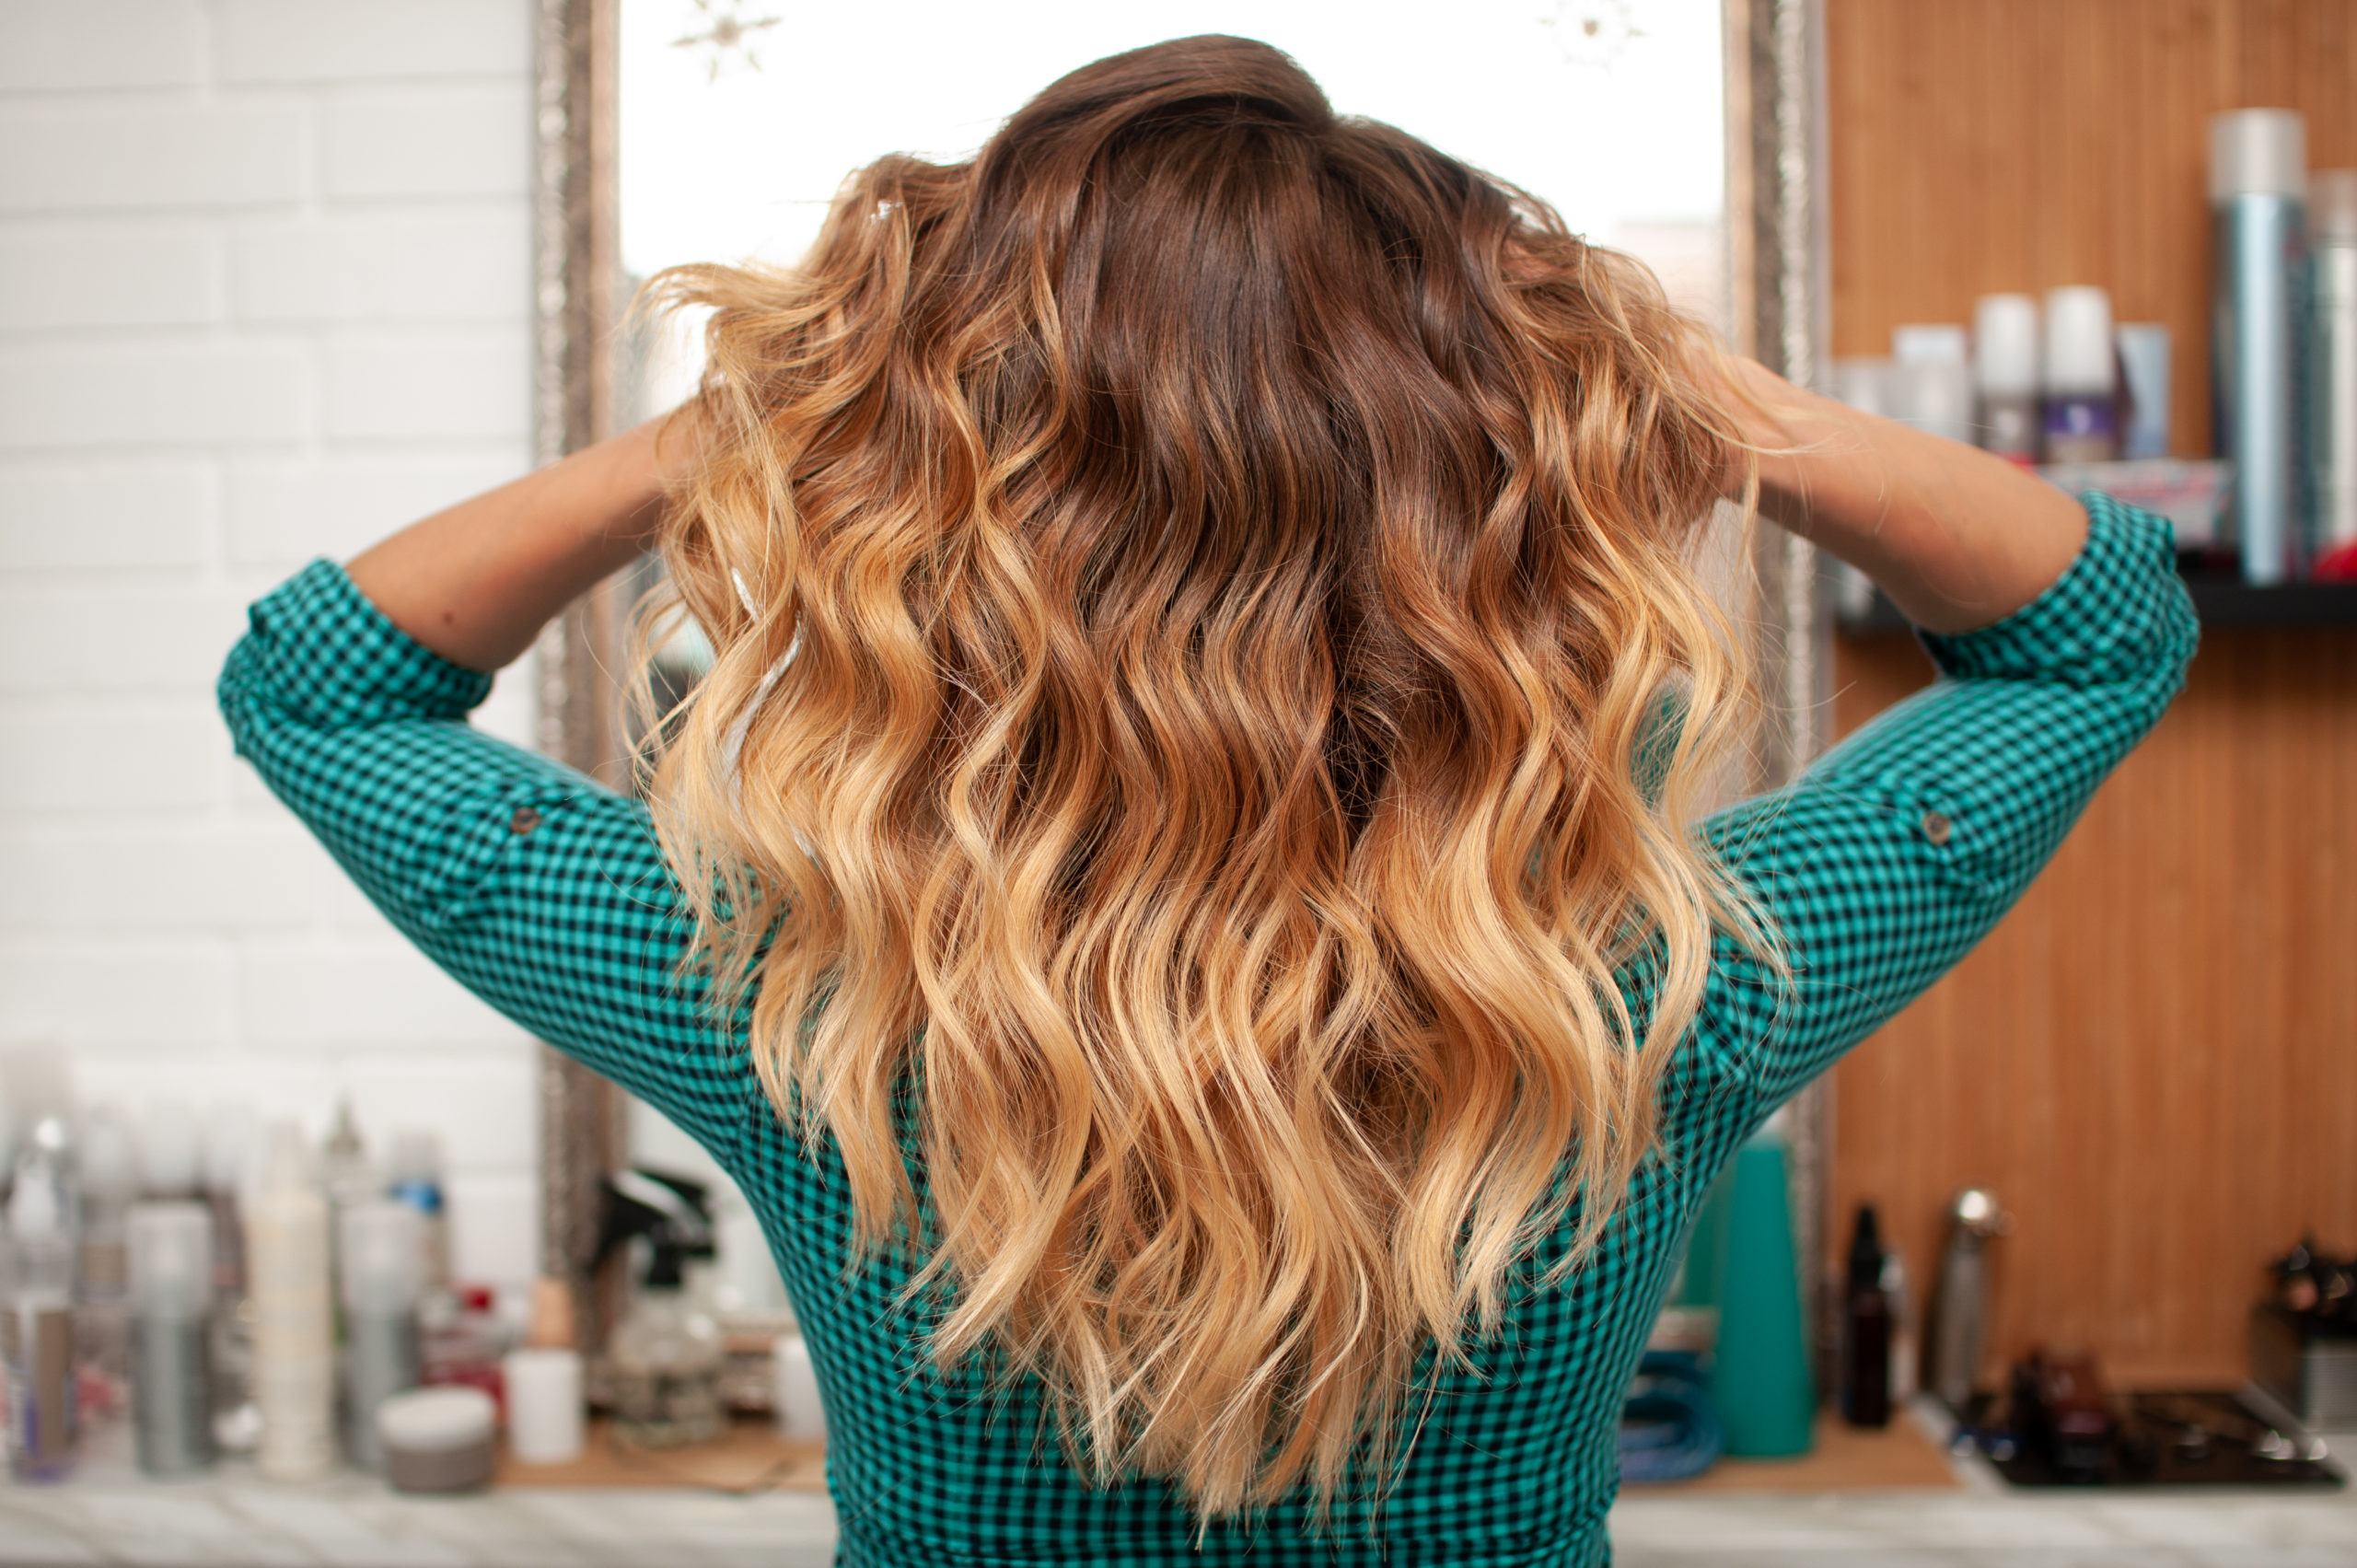 Top 12 Hair Stylists In Dallas  